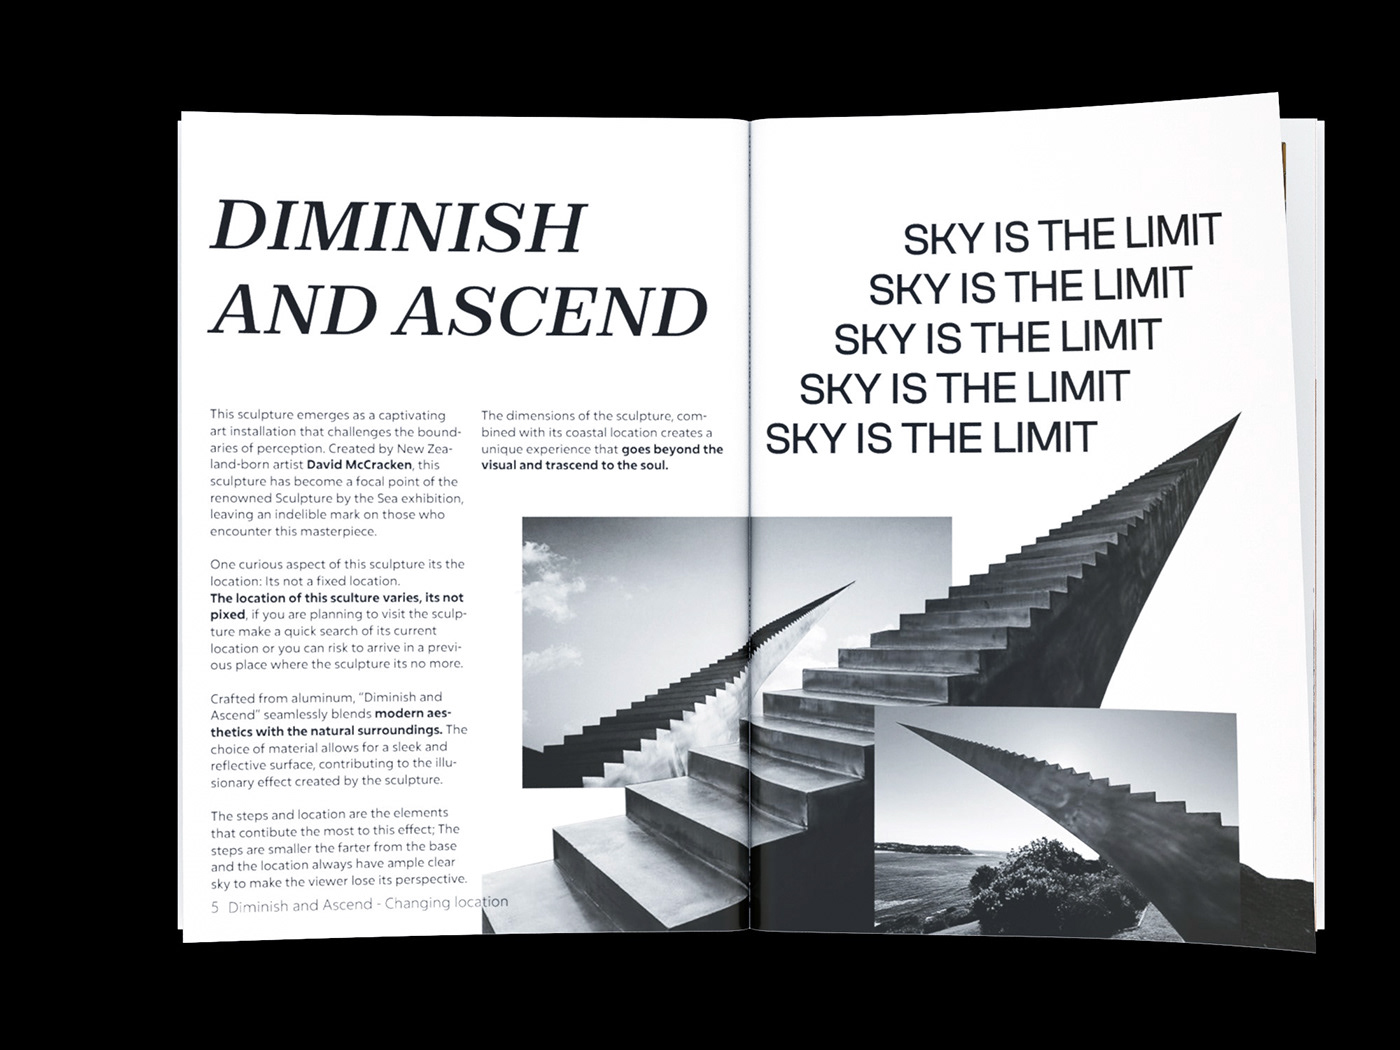 Diminish and ascend magazine section